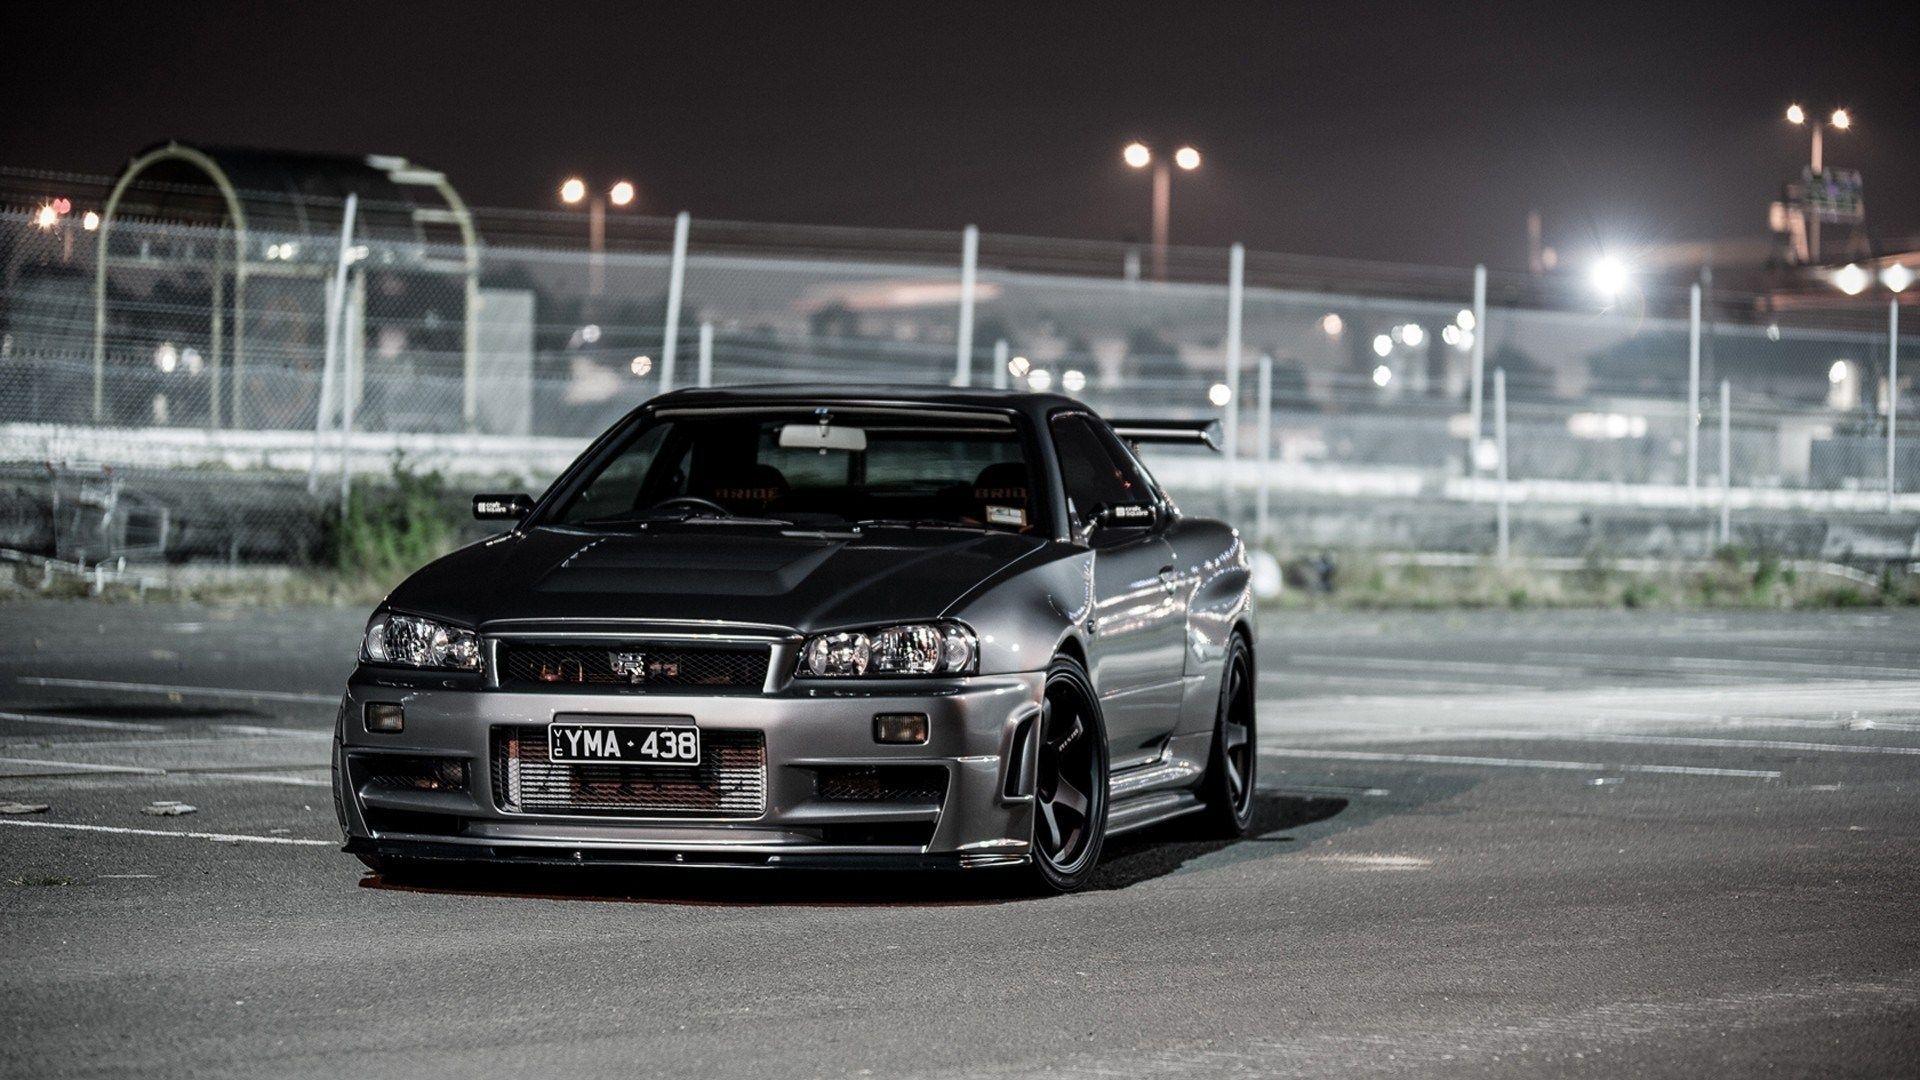 R34 Skyline Wallpapers - Wallpaper Cave